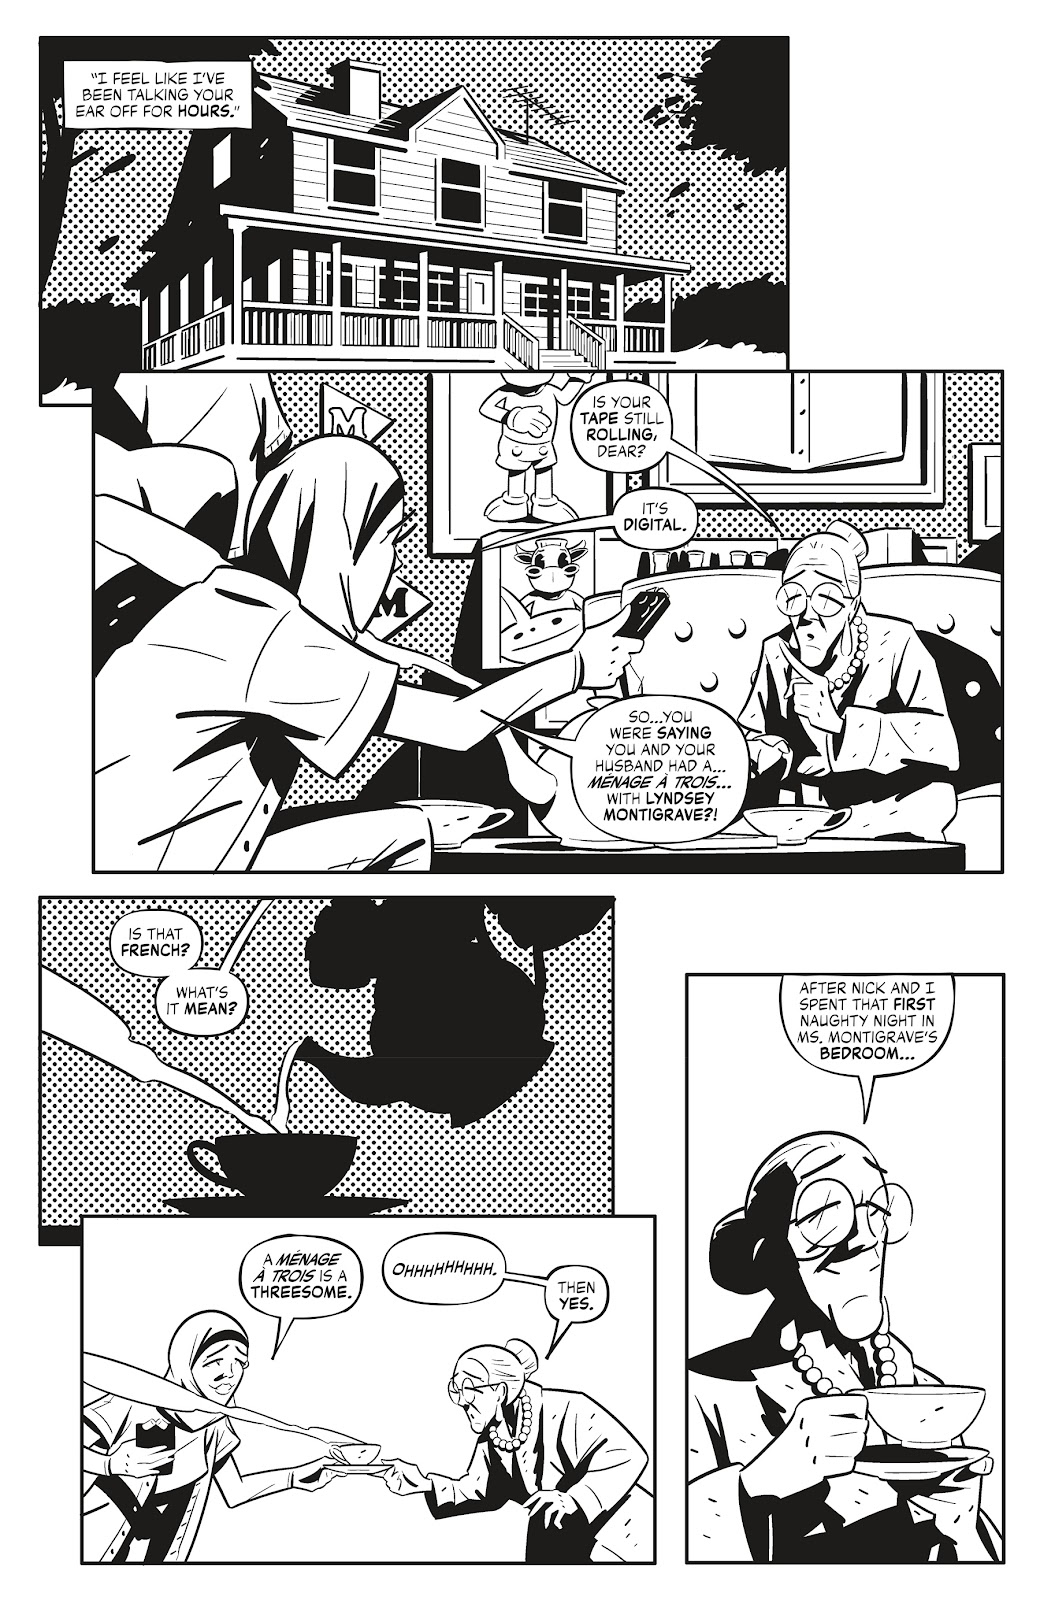 Quick Stops Vol. 2 issue 2 - Page 3